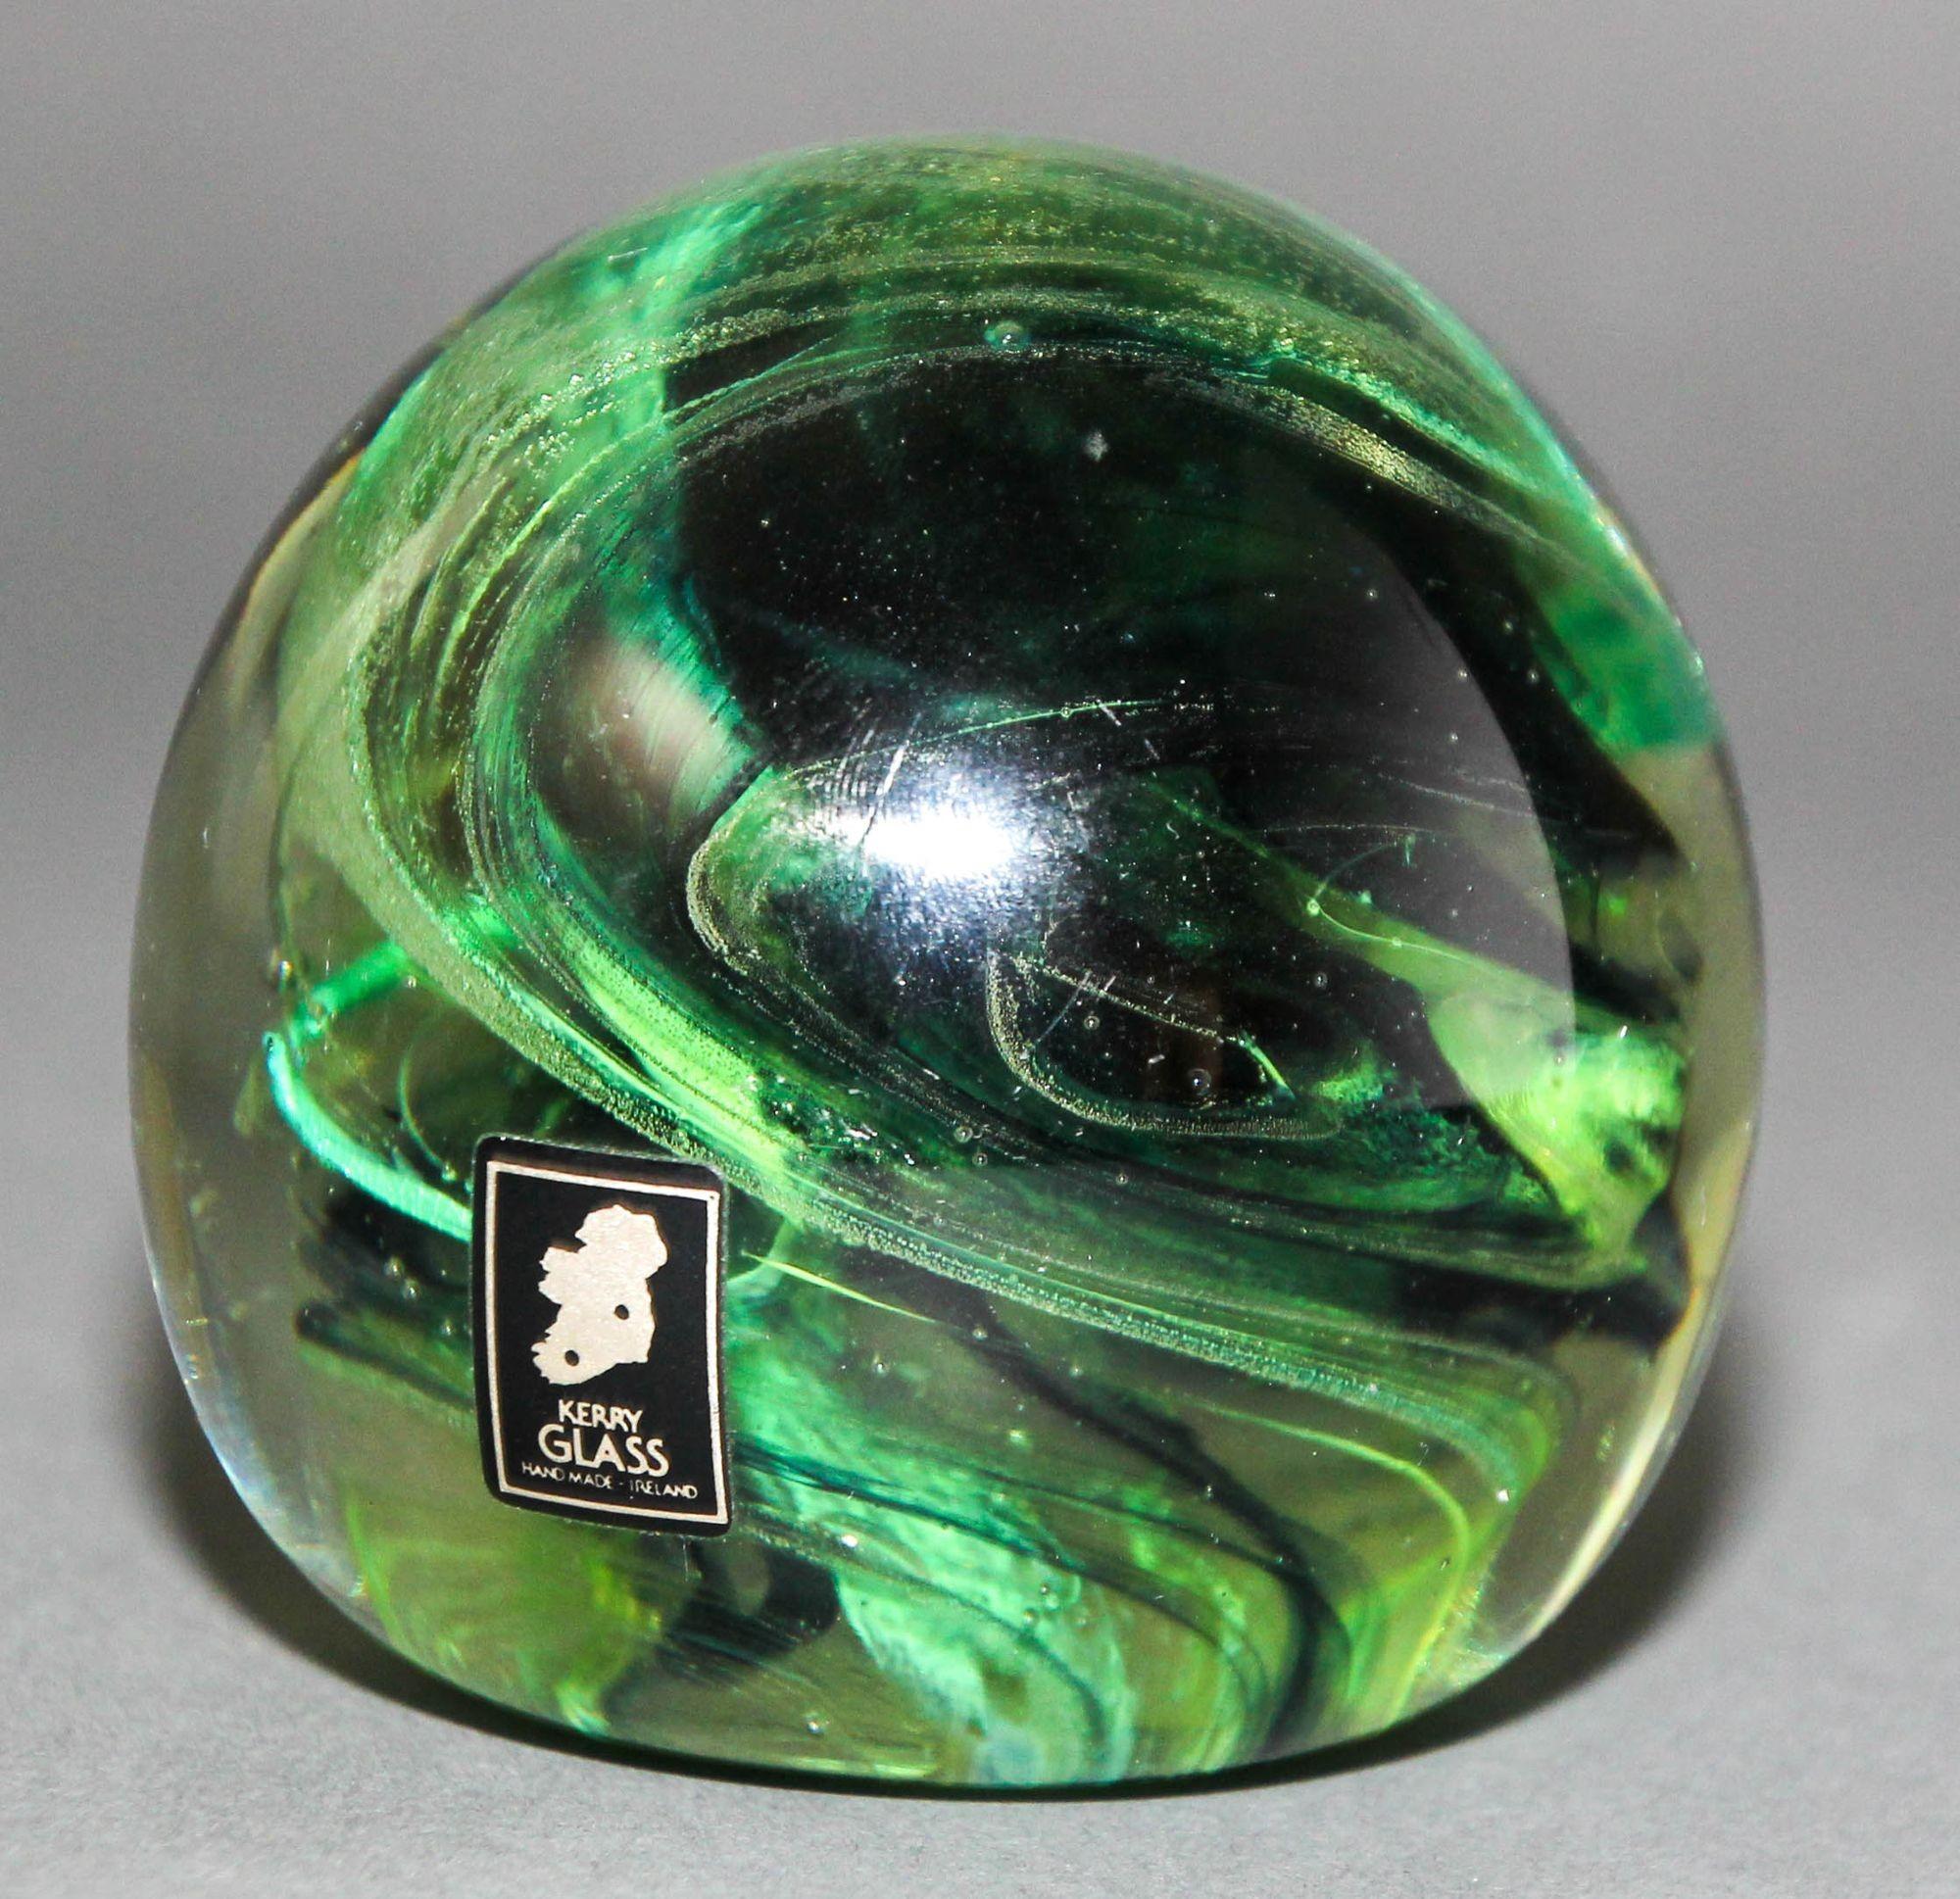 KERRY Irish Art Glass Paperweight Hand Blown in a Jade to Emerald Green 1980s For Sale 5